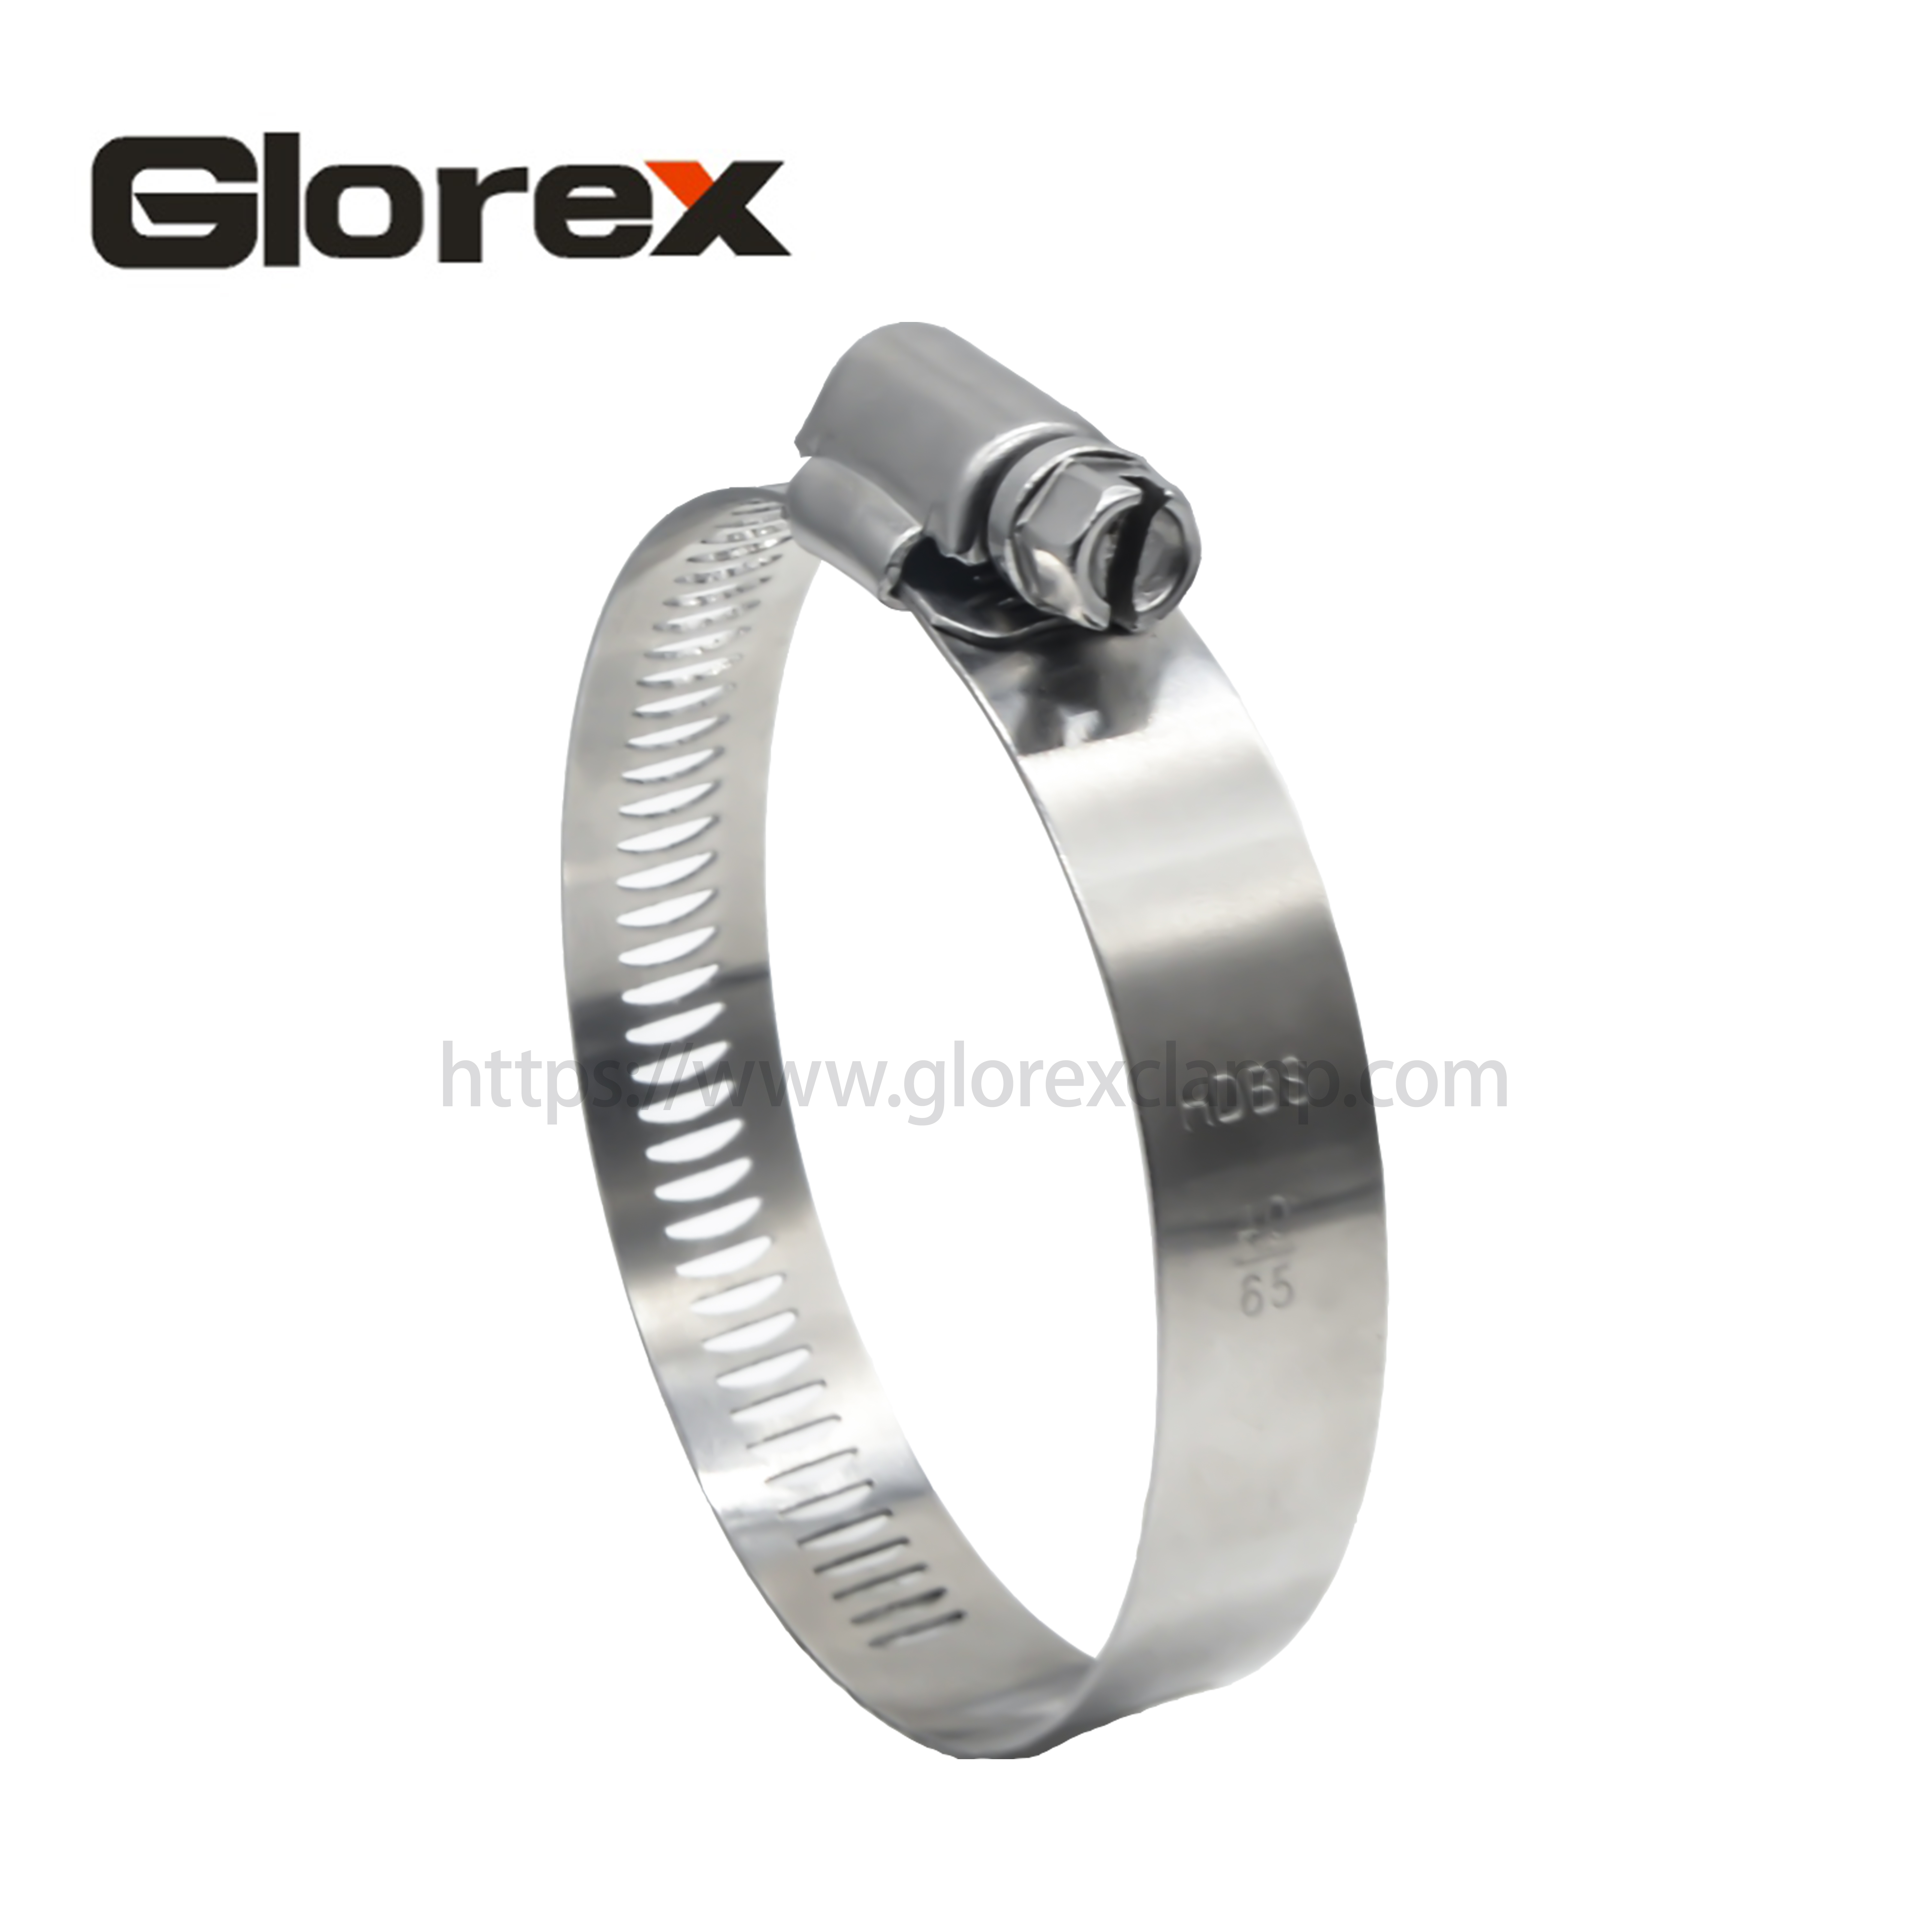 14.2mm American type hose clamp Featured Image